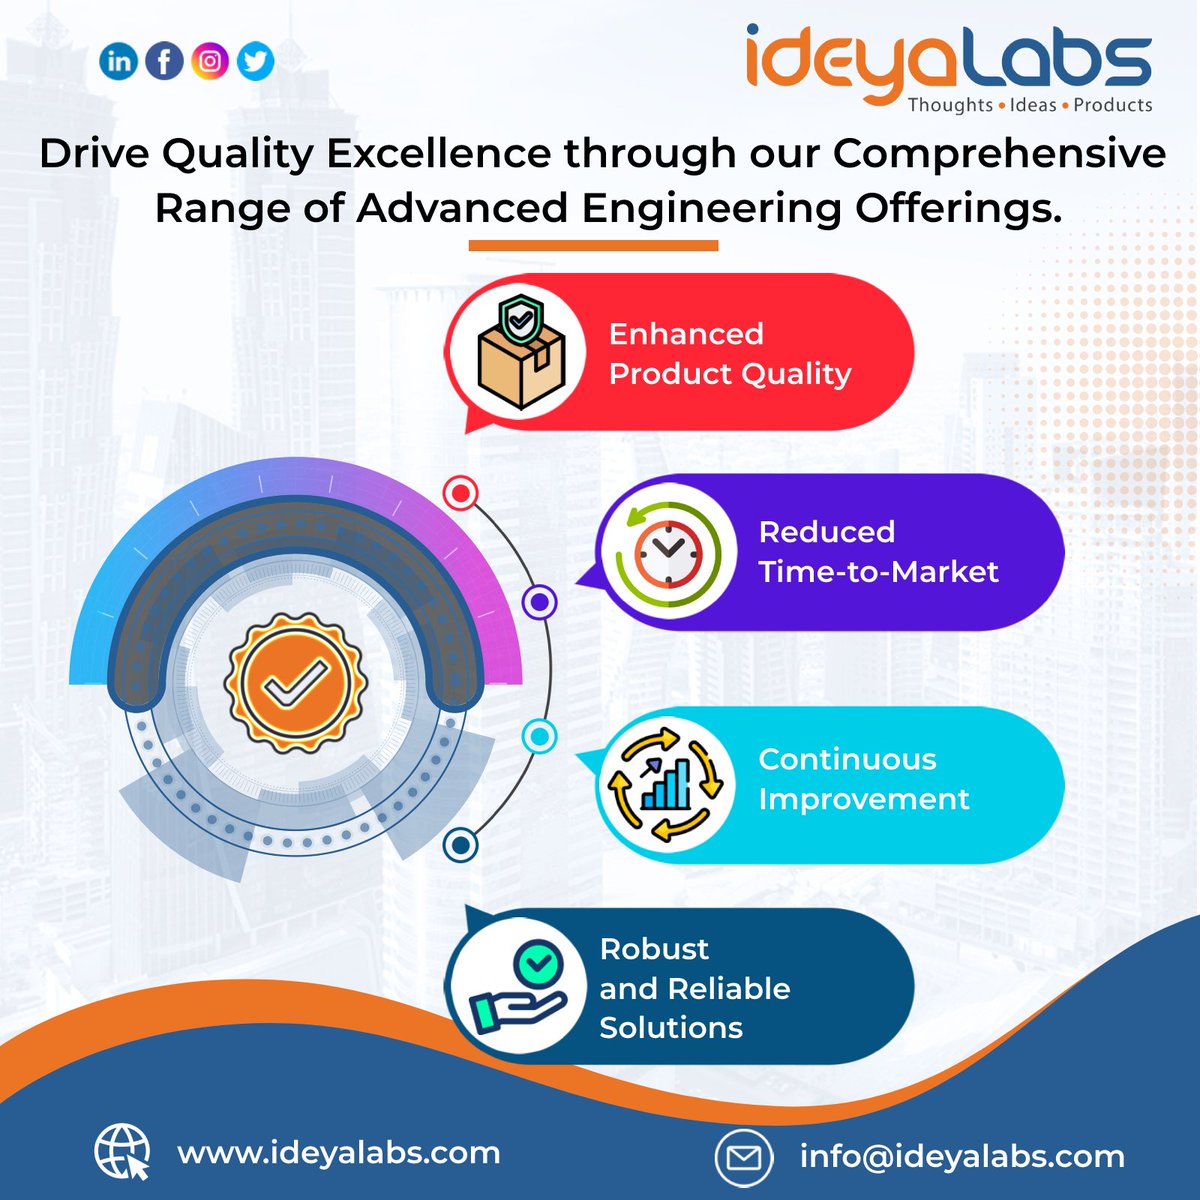 Unlock quality excellence with our comprehensive engineering offerings. Enhance product quality, reduce time-to-market, improve customer satisfaction, optimize operational efficiency, ensure compliance, and drive continuous improvement.
#ideyaLabs #quality #engineering